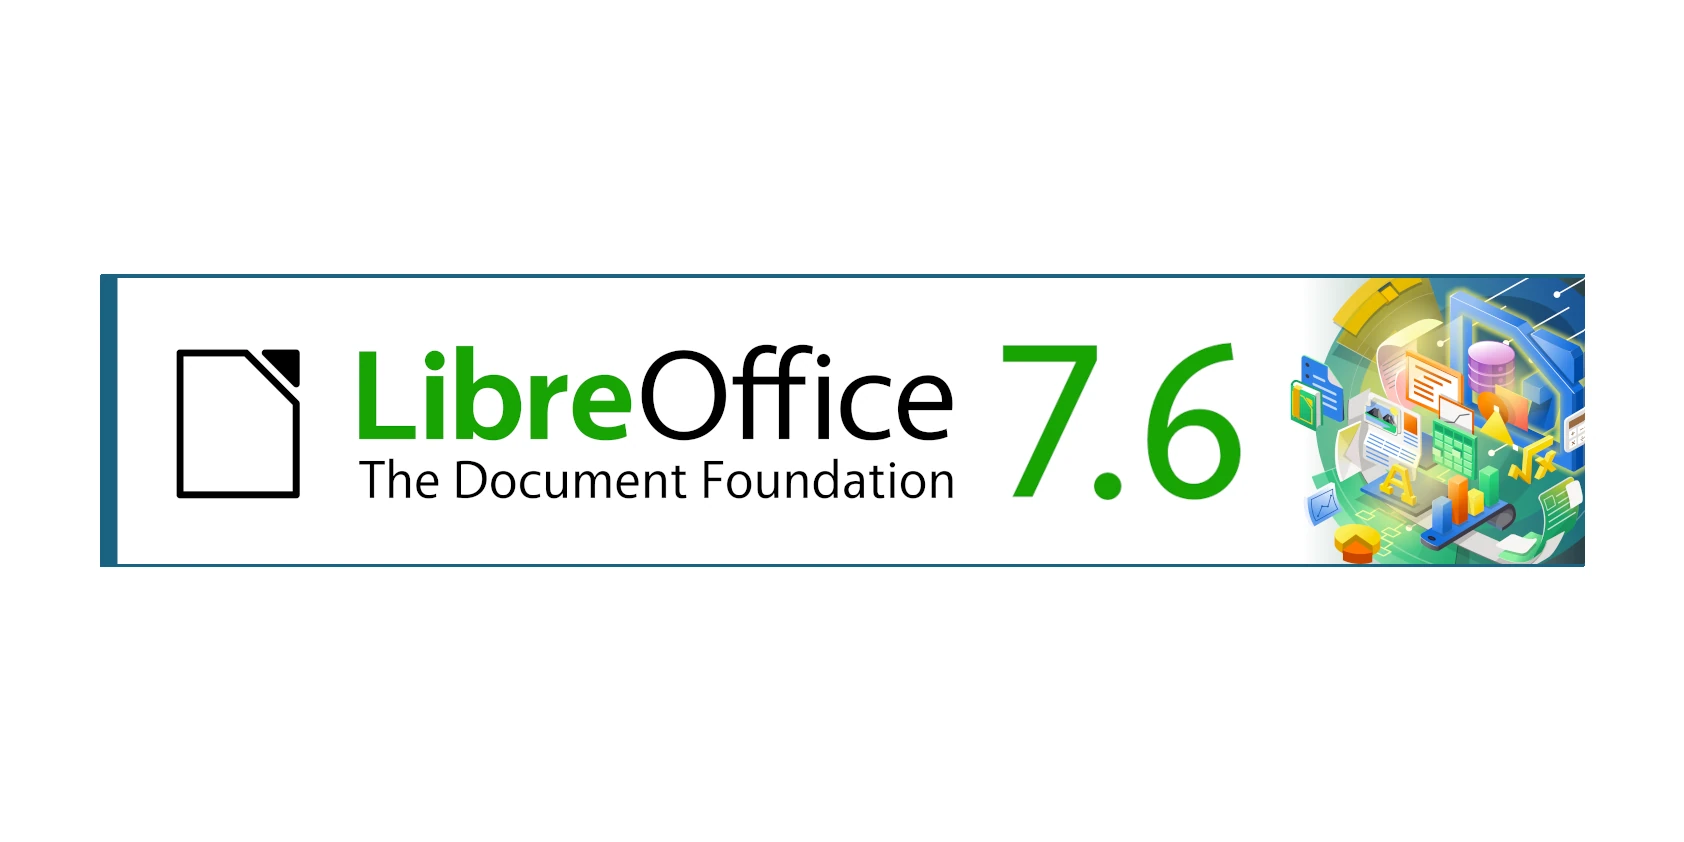 LibreOffice 7.6.5 Office Suite Is Out Now with More Than 90 Bug Fixes